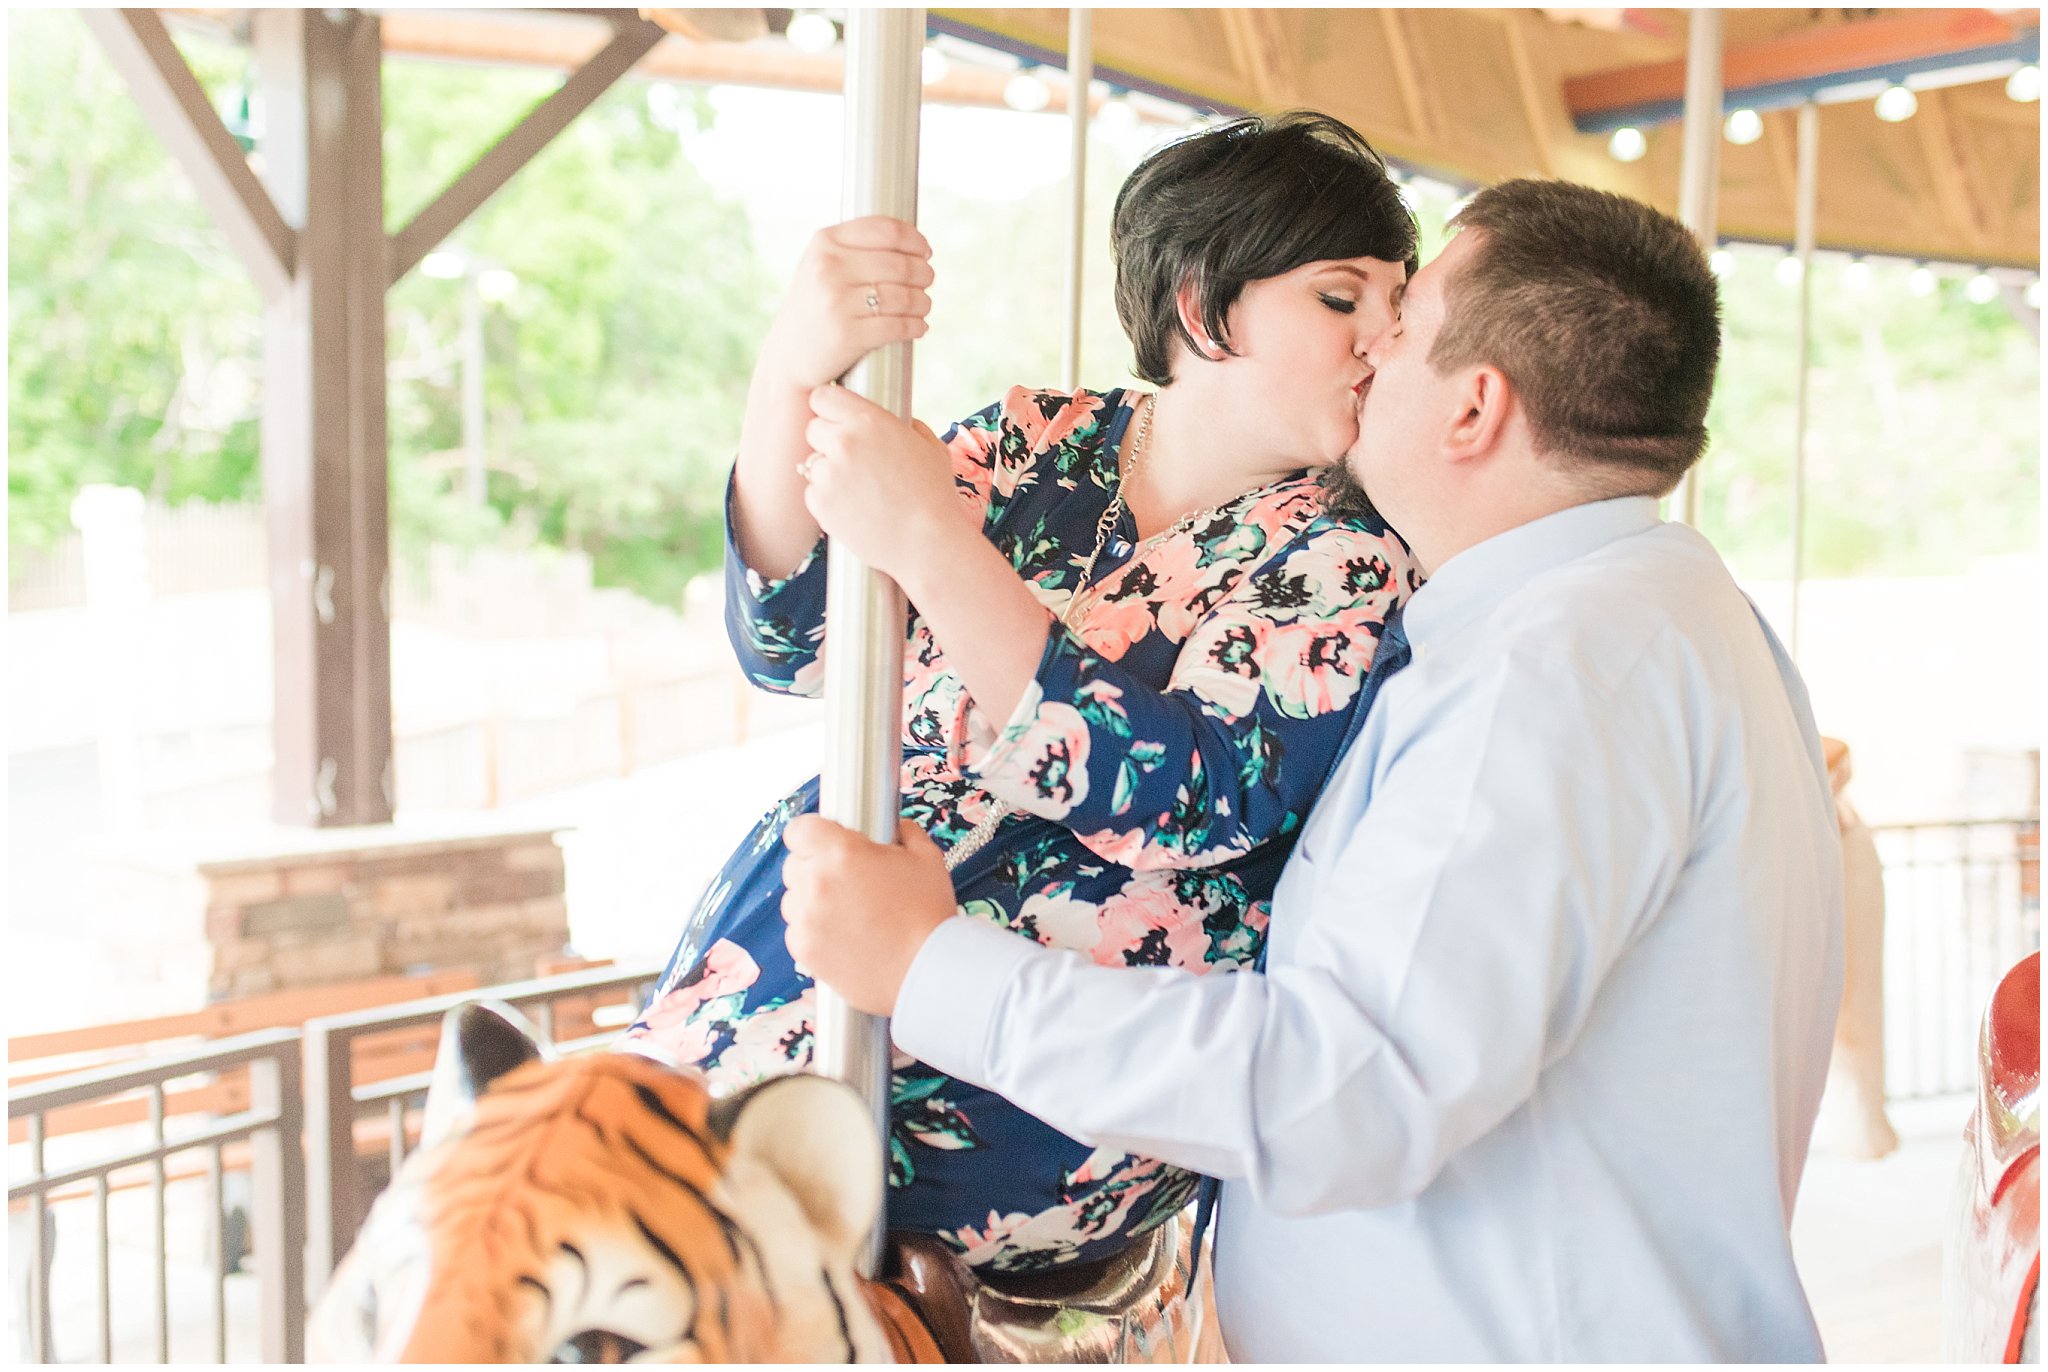 Couple visiting the zoo and riding the carousel for their engagement session | Hogle Zoo Engagement Session | Fun and unique engagement | Utah Engagement Photography | Jessie and Dallin Photography